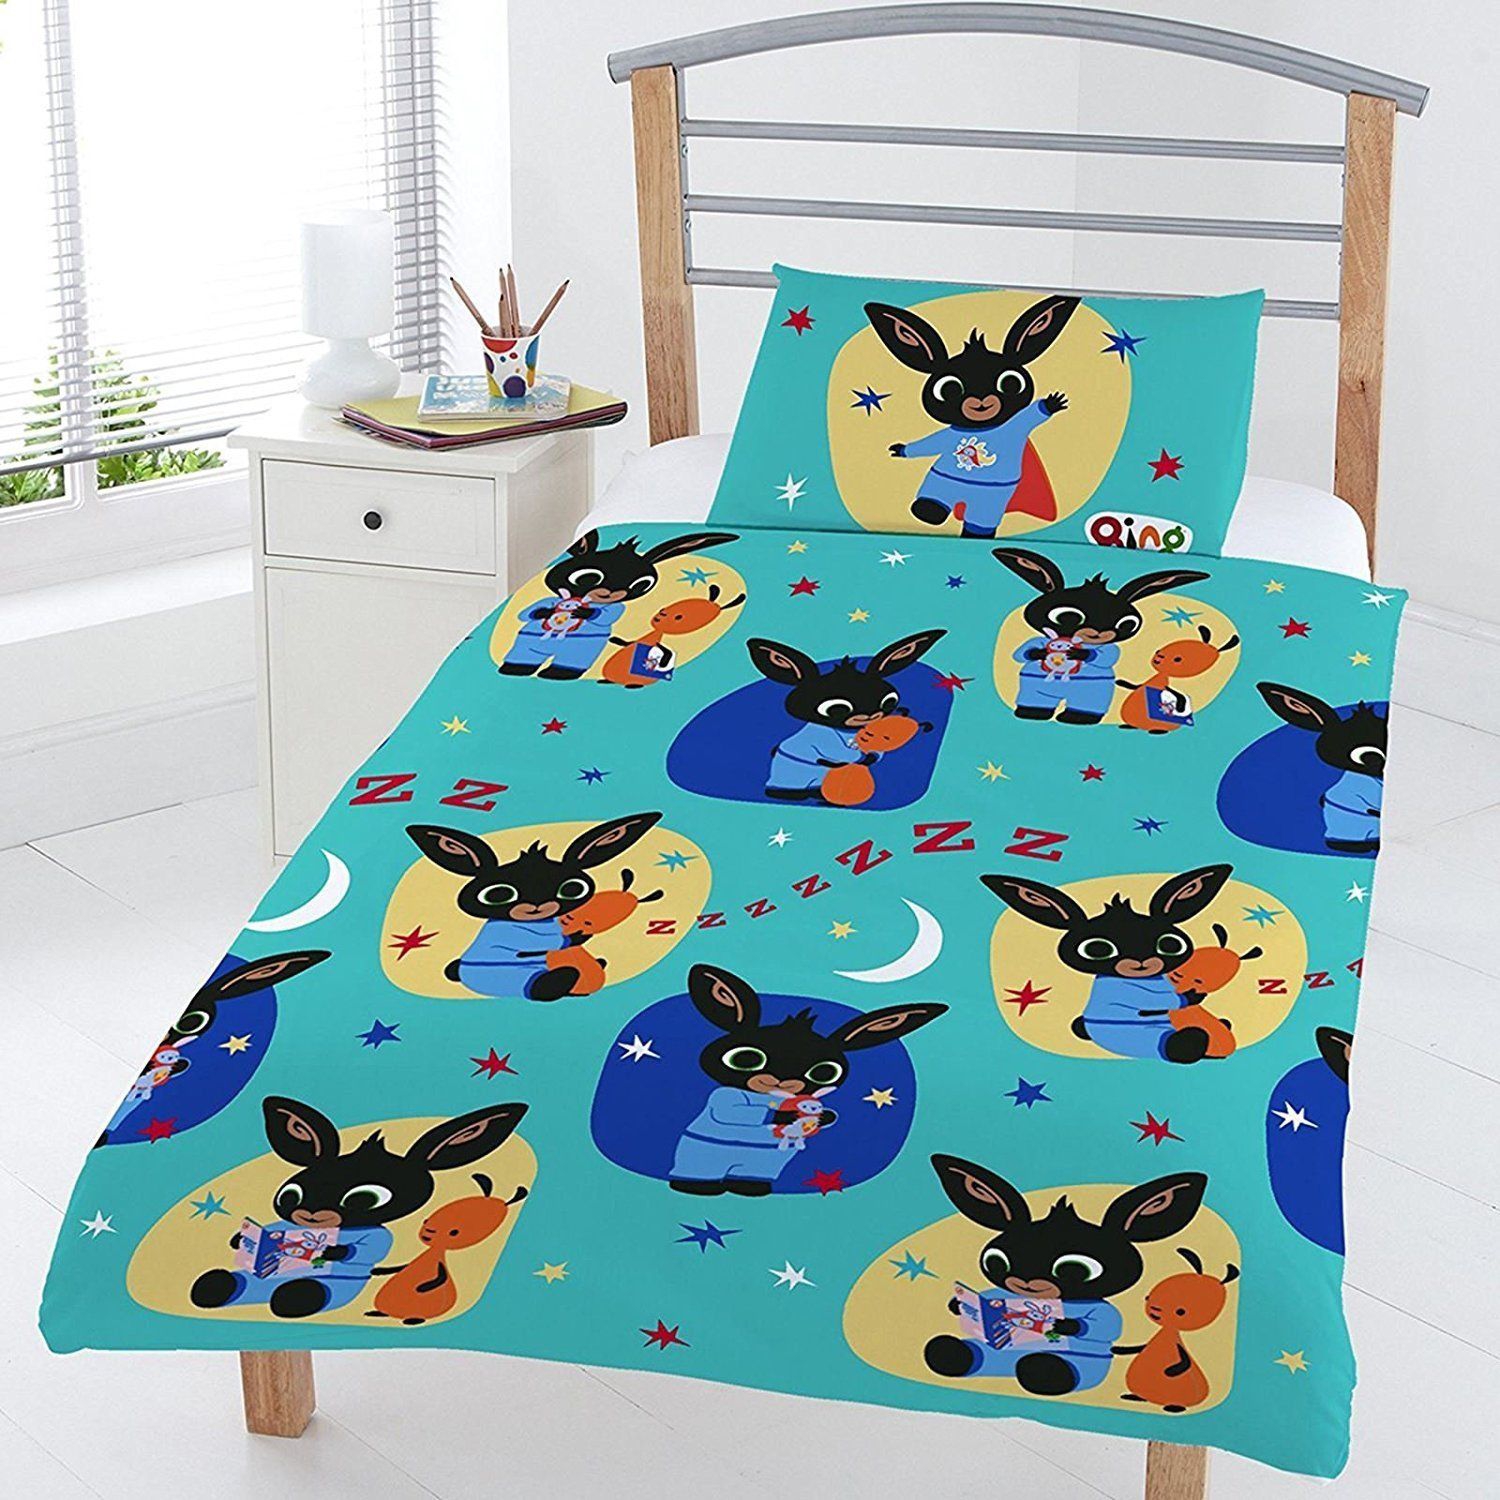 Bing Bunny Polycotton Rotary Junior Cot Bed Duvet Quilt Cover Set